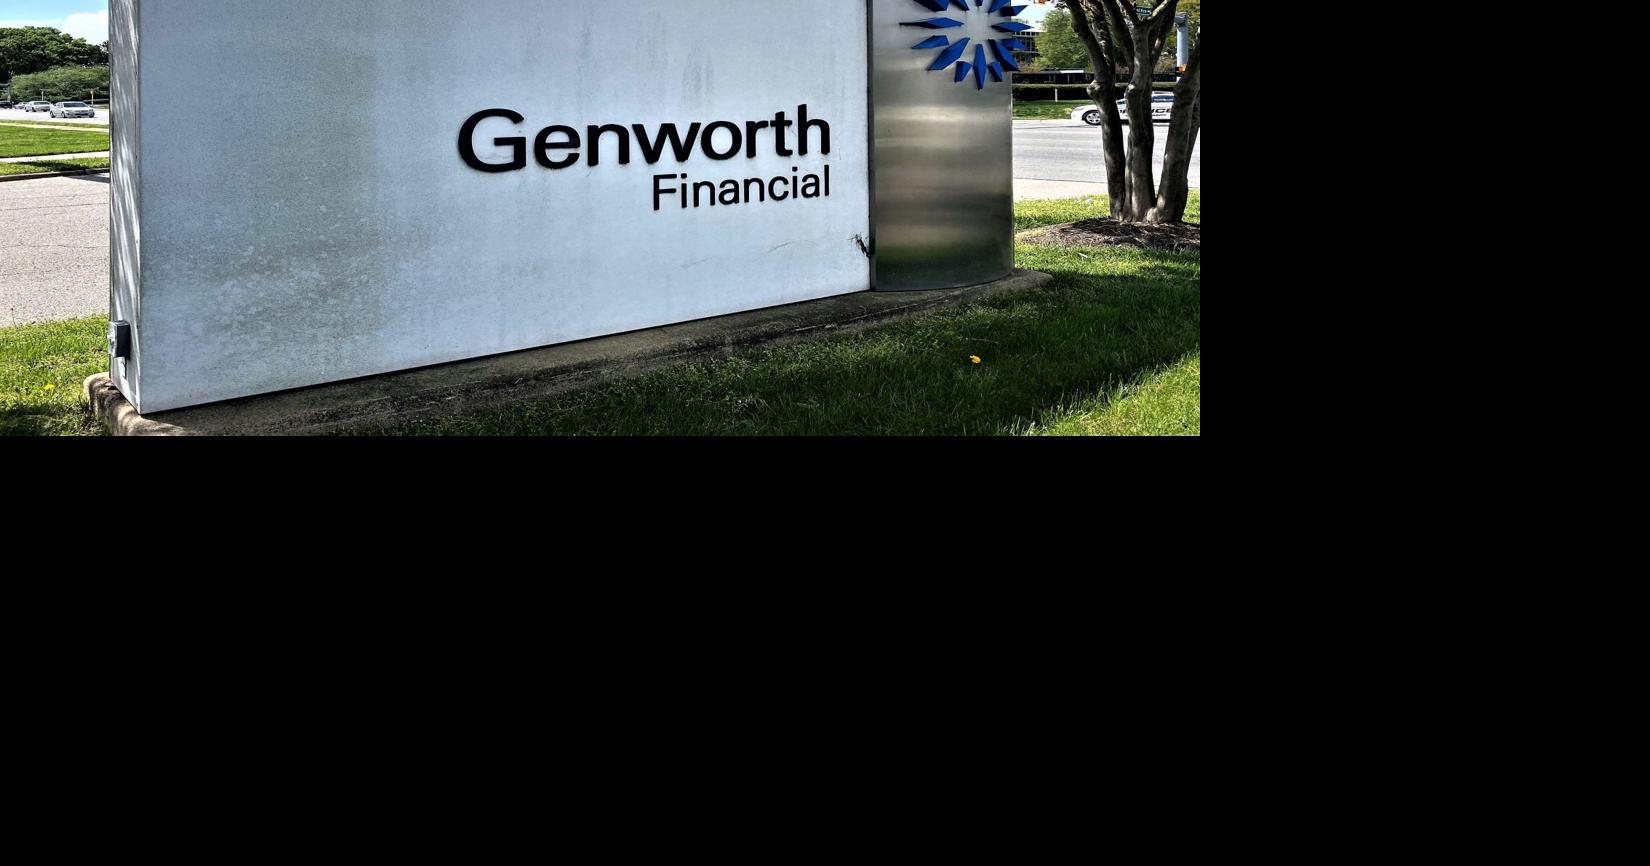 Genworth settles class action suit over steep universal life increases